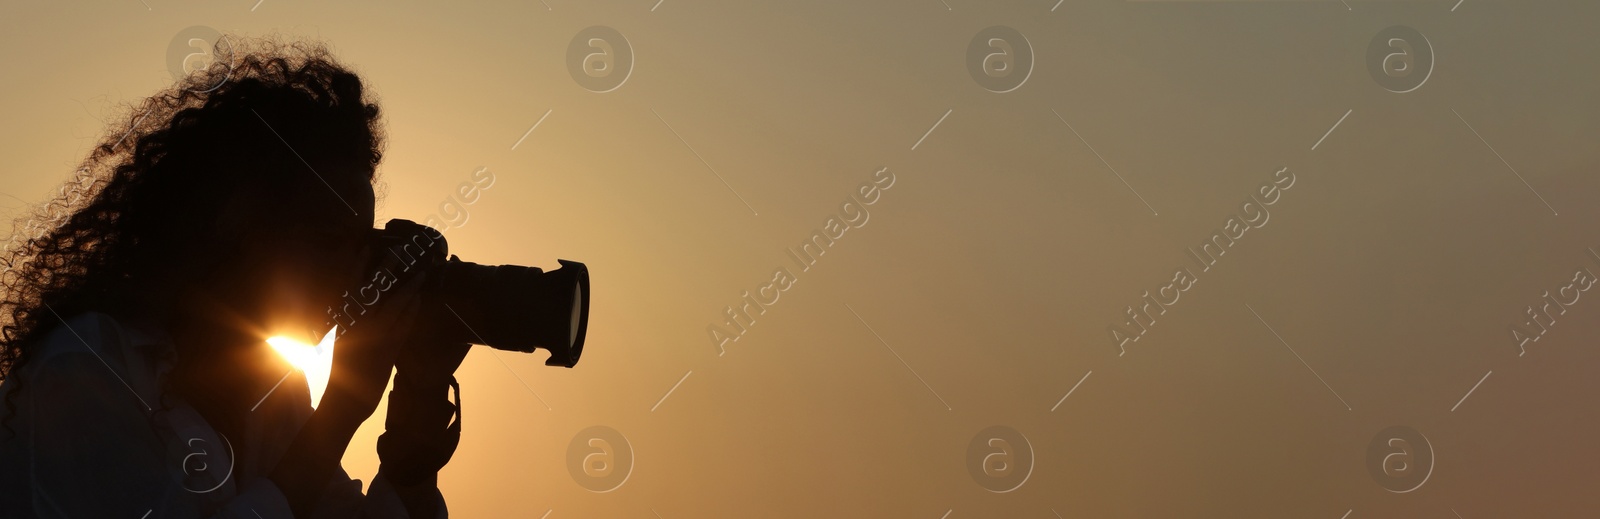 Image of Photographer taking photo with professional camera outdoors at sunset, space for text. Banner design